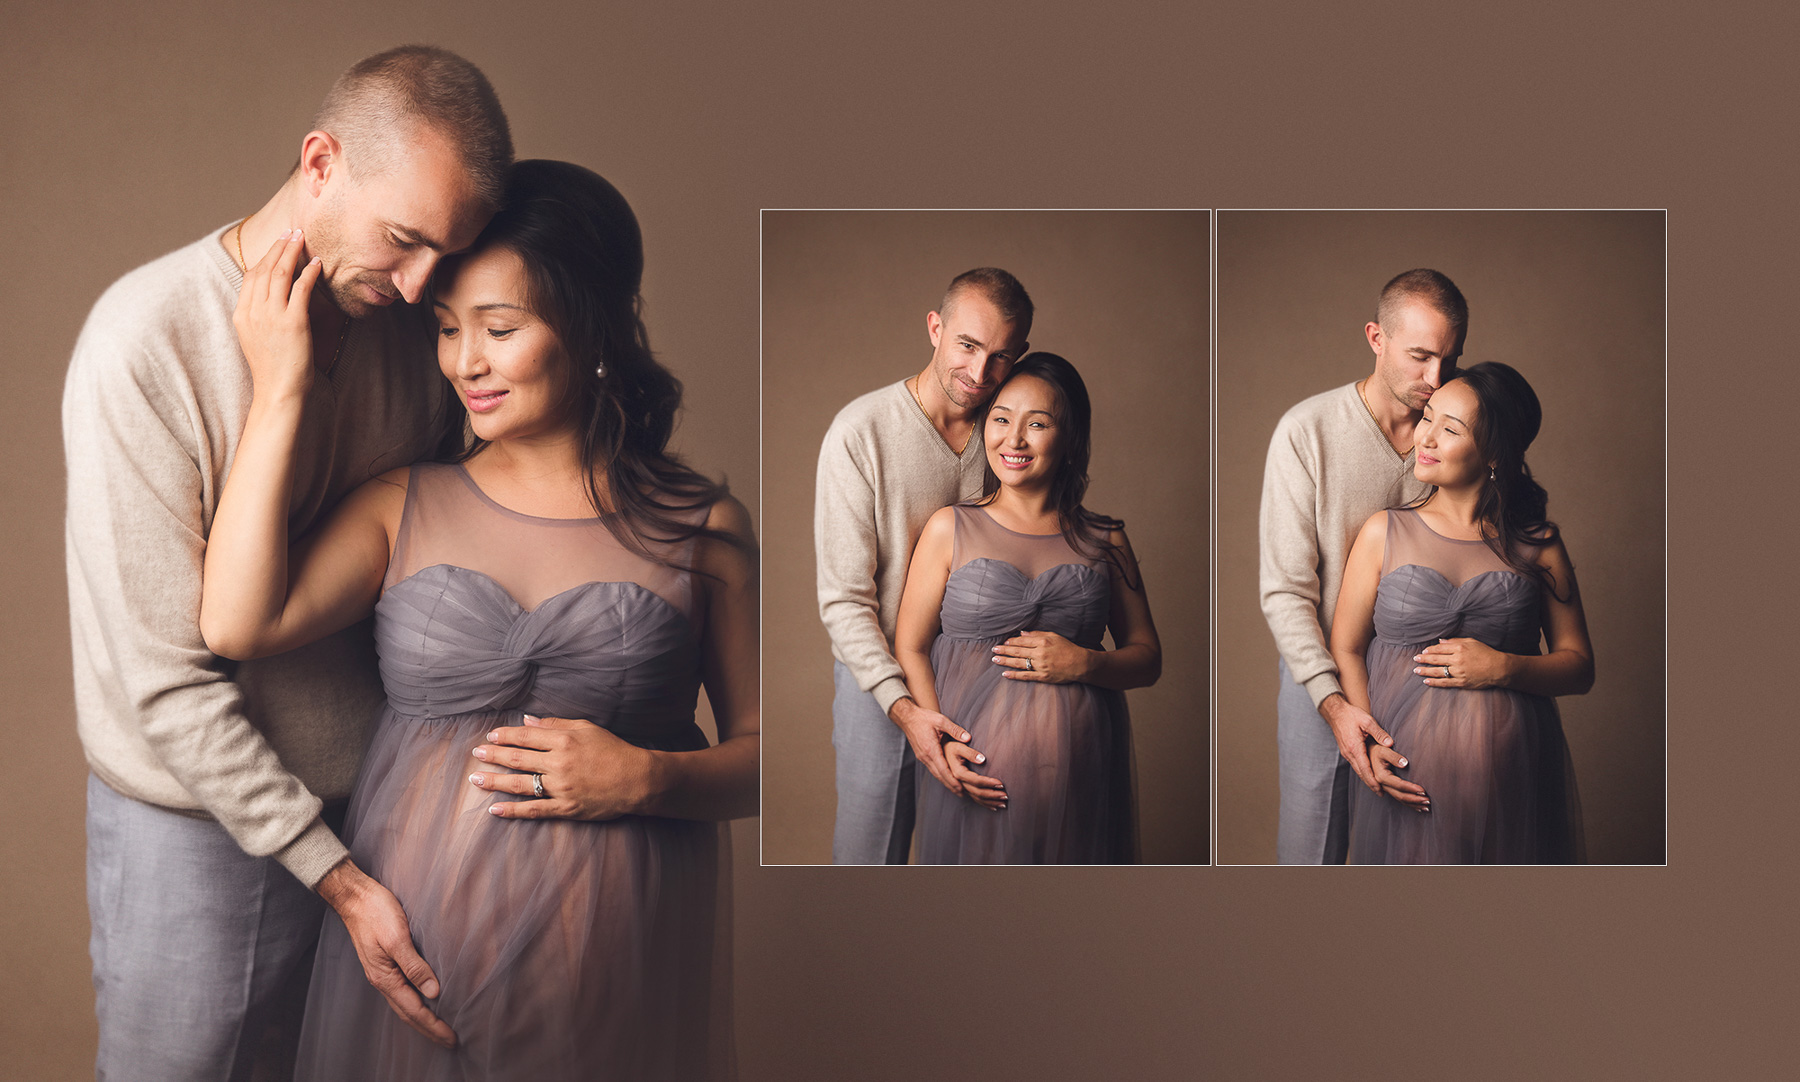 maternity photography vancouver